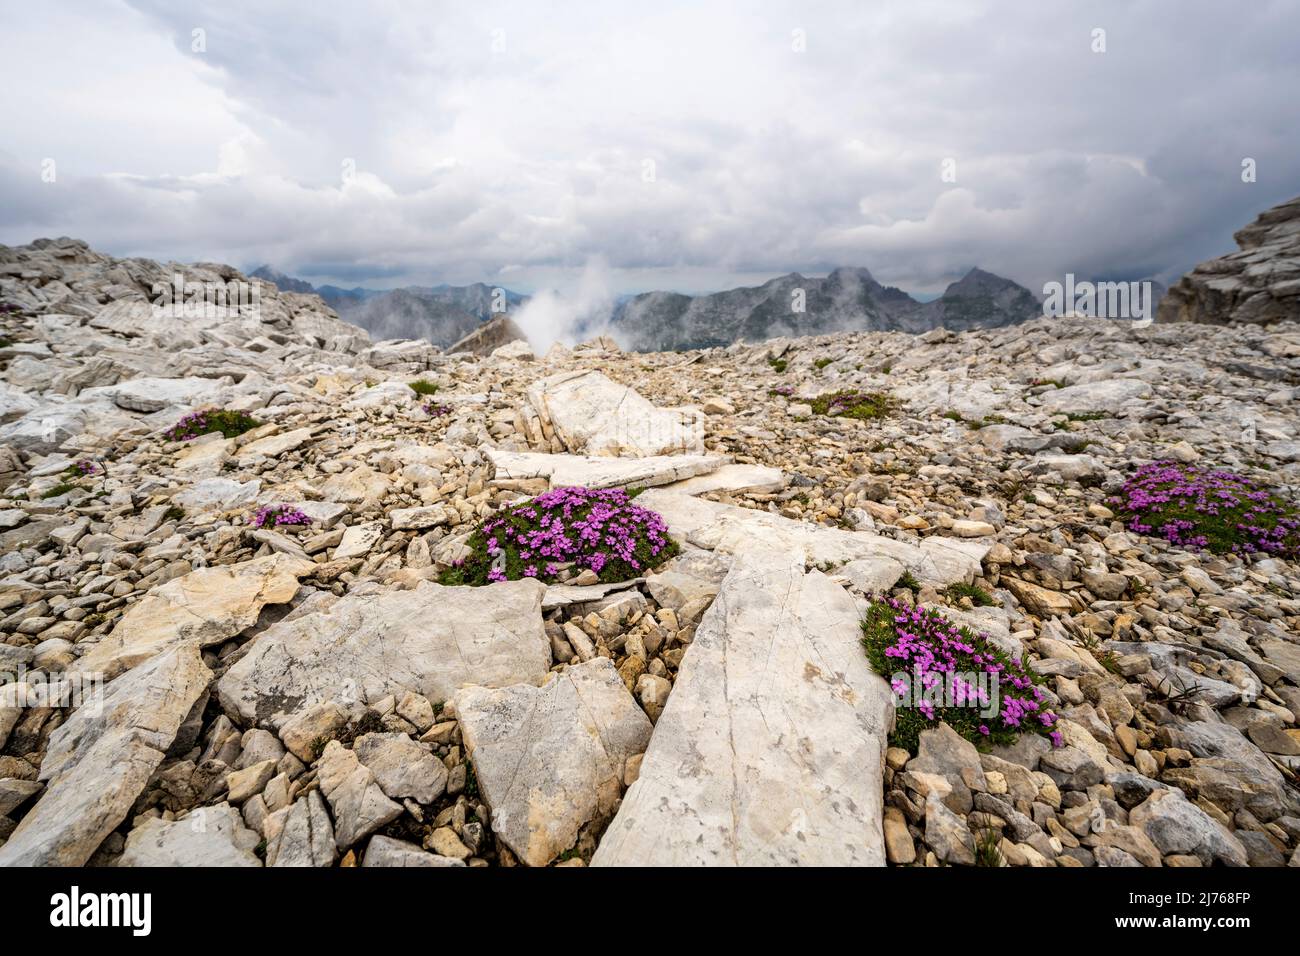 Typical limestone in the Karwendel in the Breitgrieskar with stalkless glueweed, one of the few plants that can exist well at this altitude of just under 2500 m. In the background the Angerkopf and the Northern Karwendel range with dense clouds Stock Photo